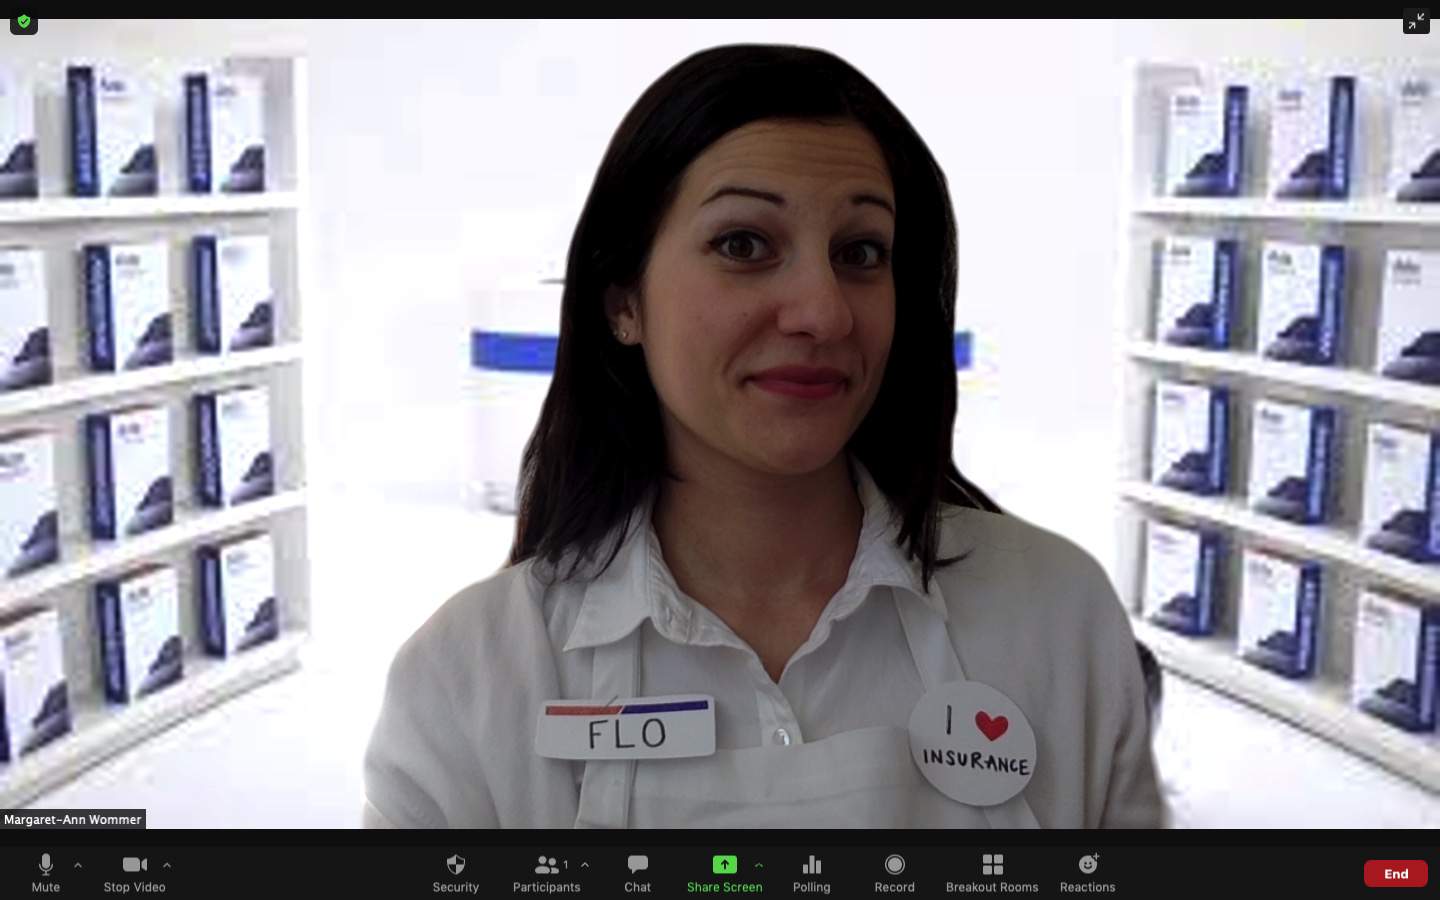 Coolest virtual classroom ever? This teacher dresses up on Zoom every day in the best costumes